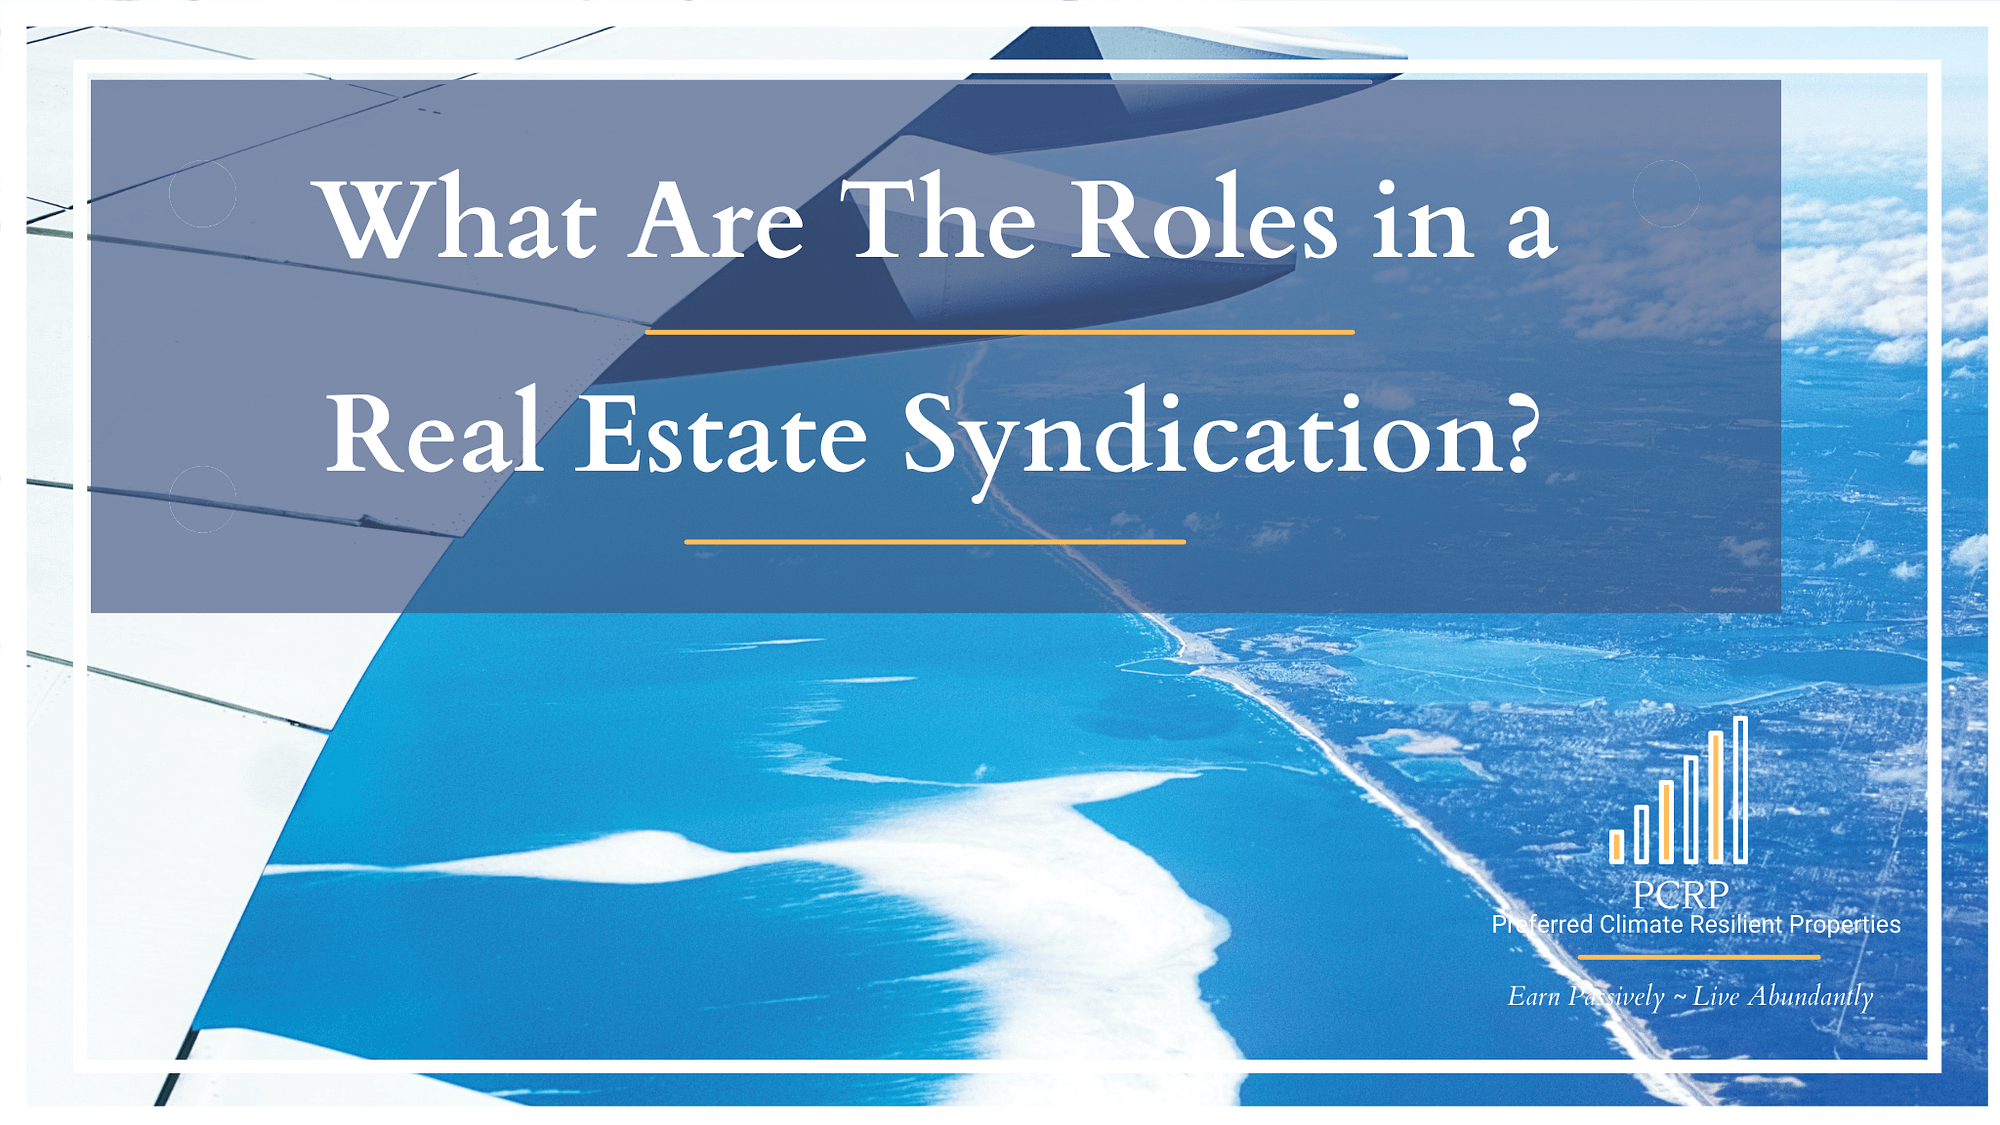 What are the key roles in a real estate syndication